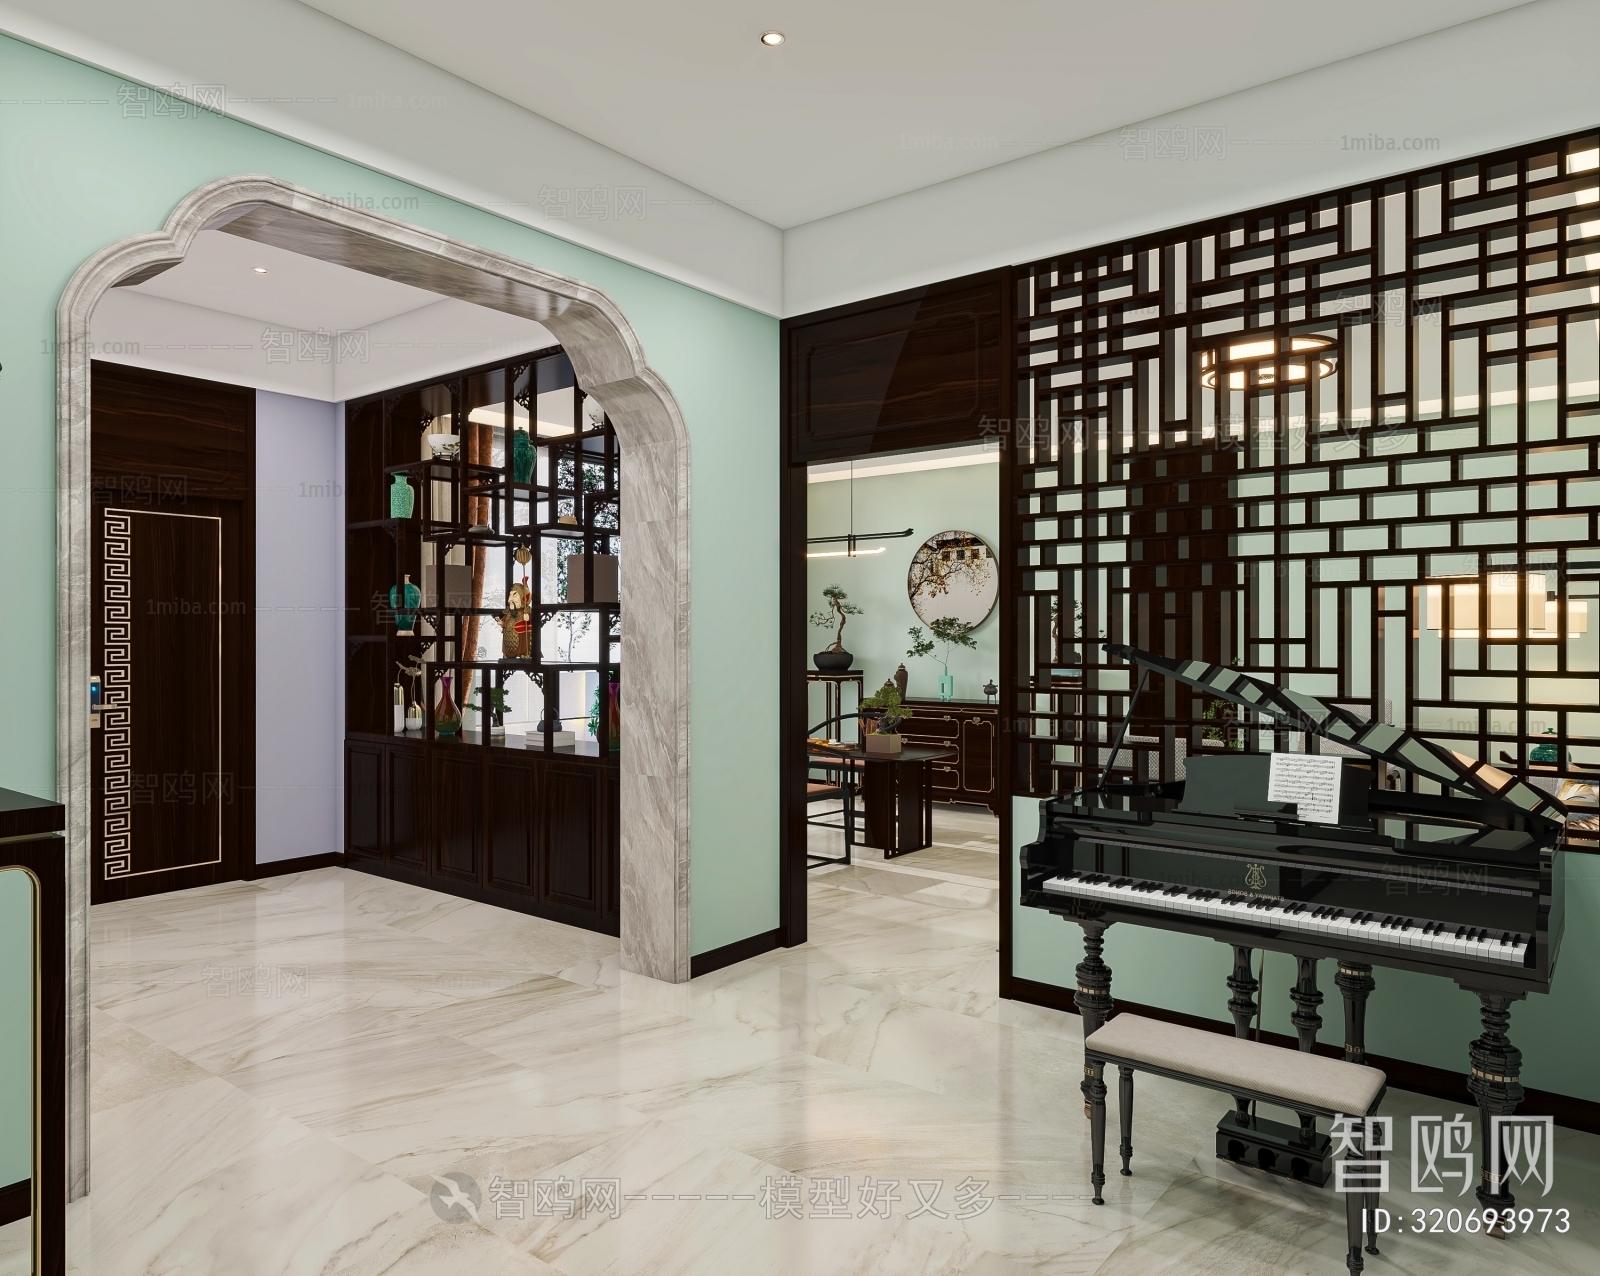 New Chinese Style Piano Room